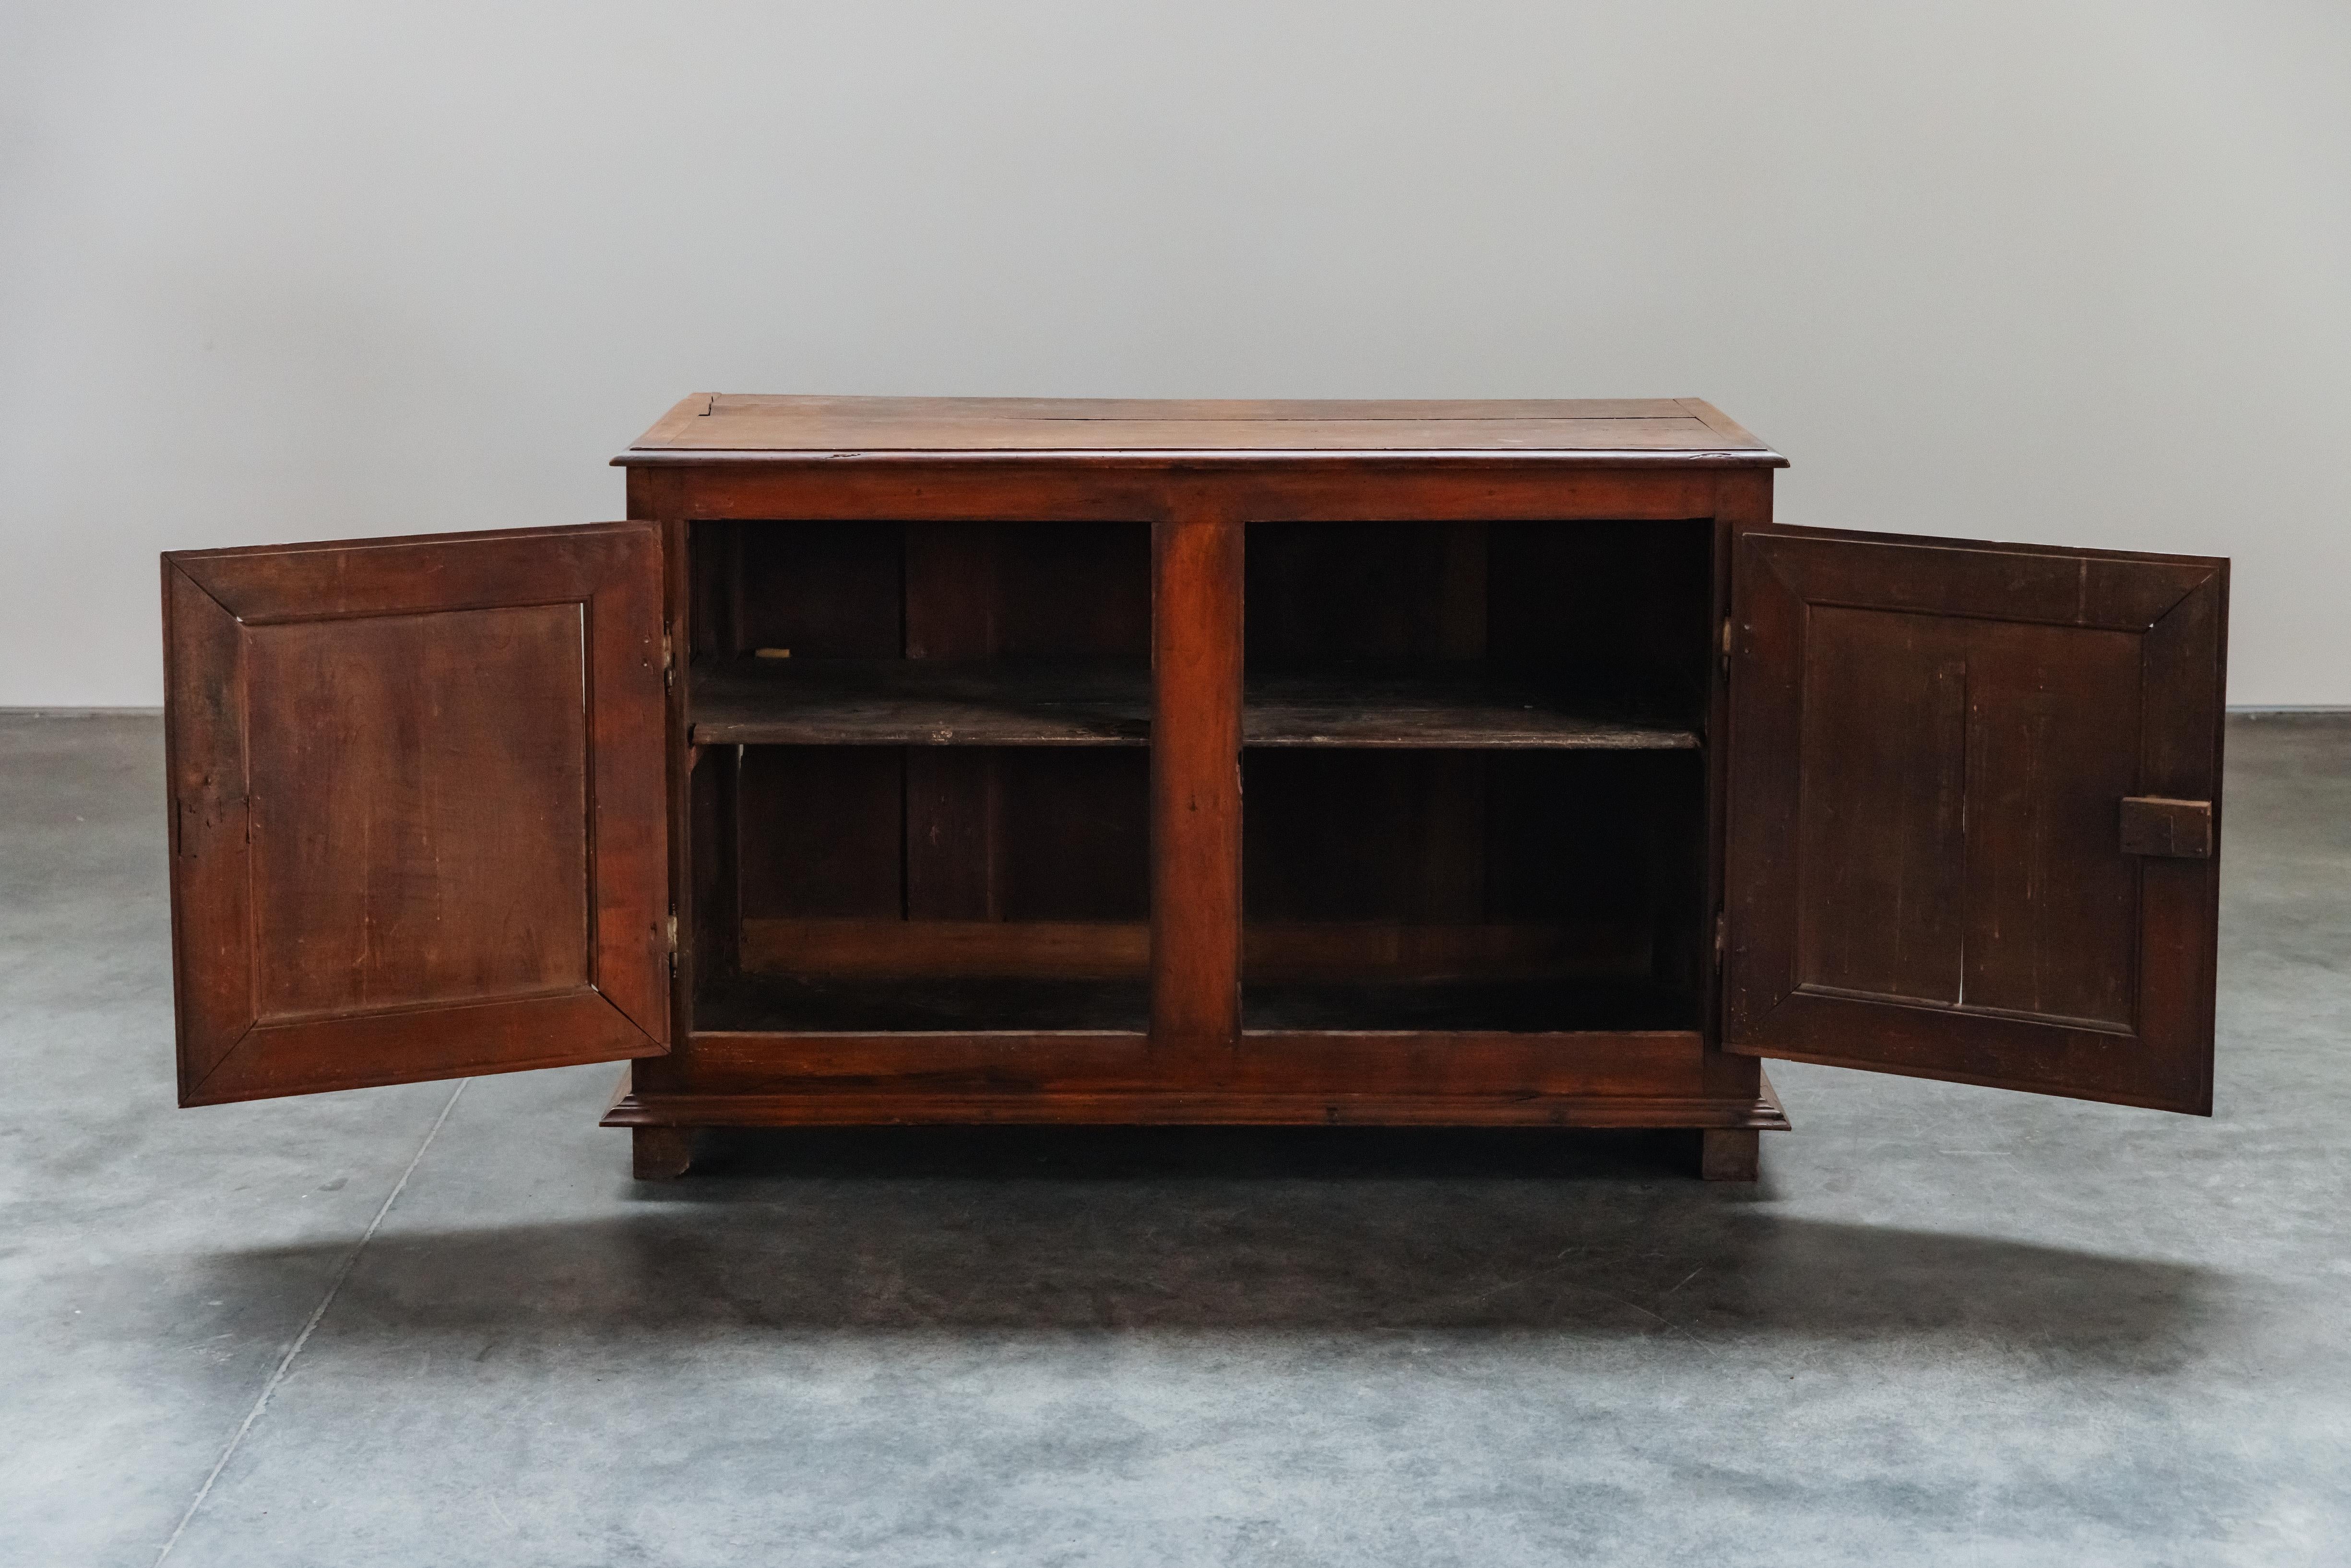 Early French Sideboard From France, Circa 1820.  Solid pine construction with great patina and use.